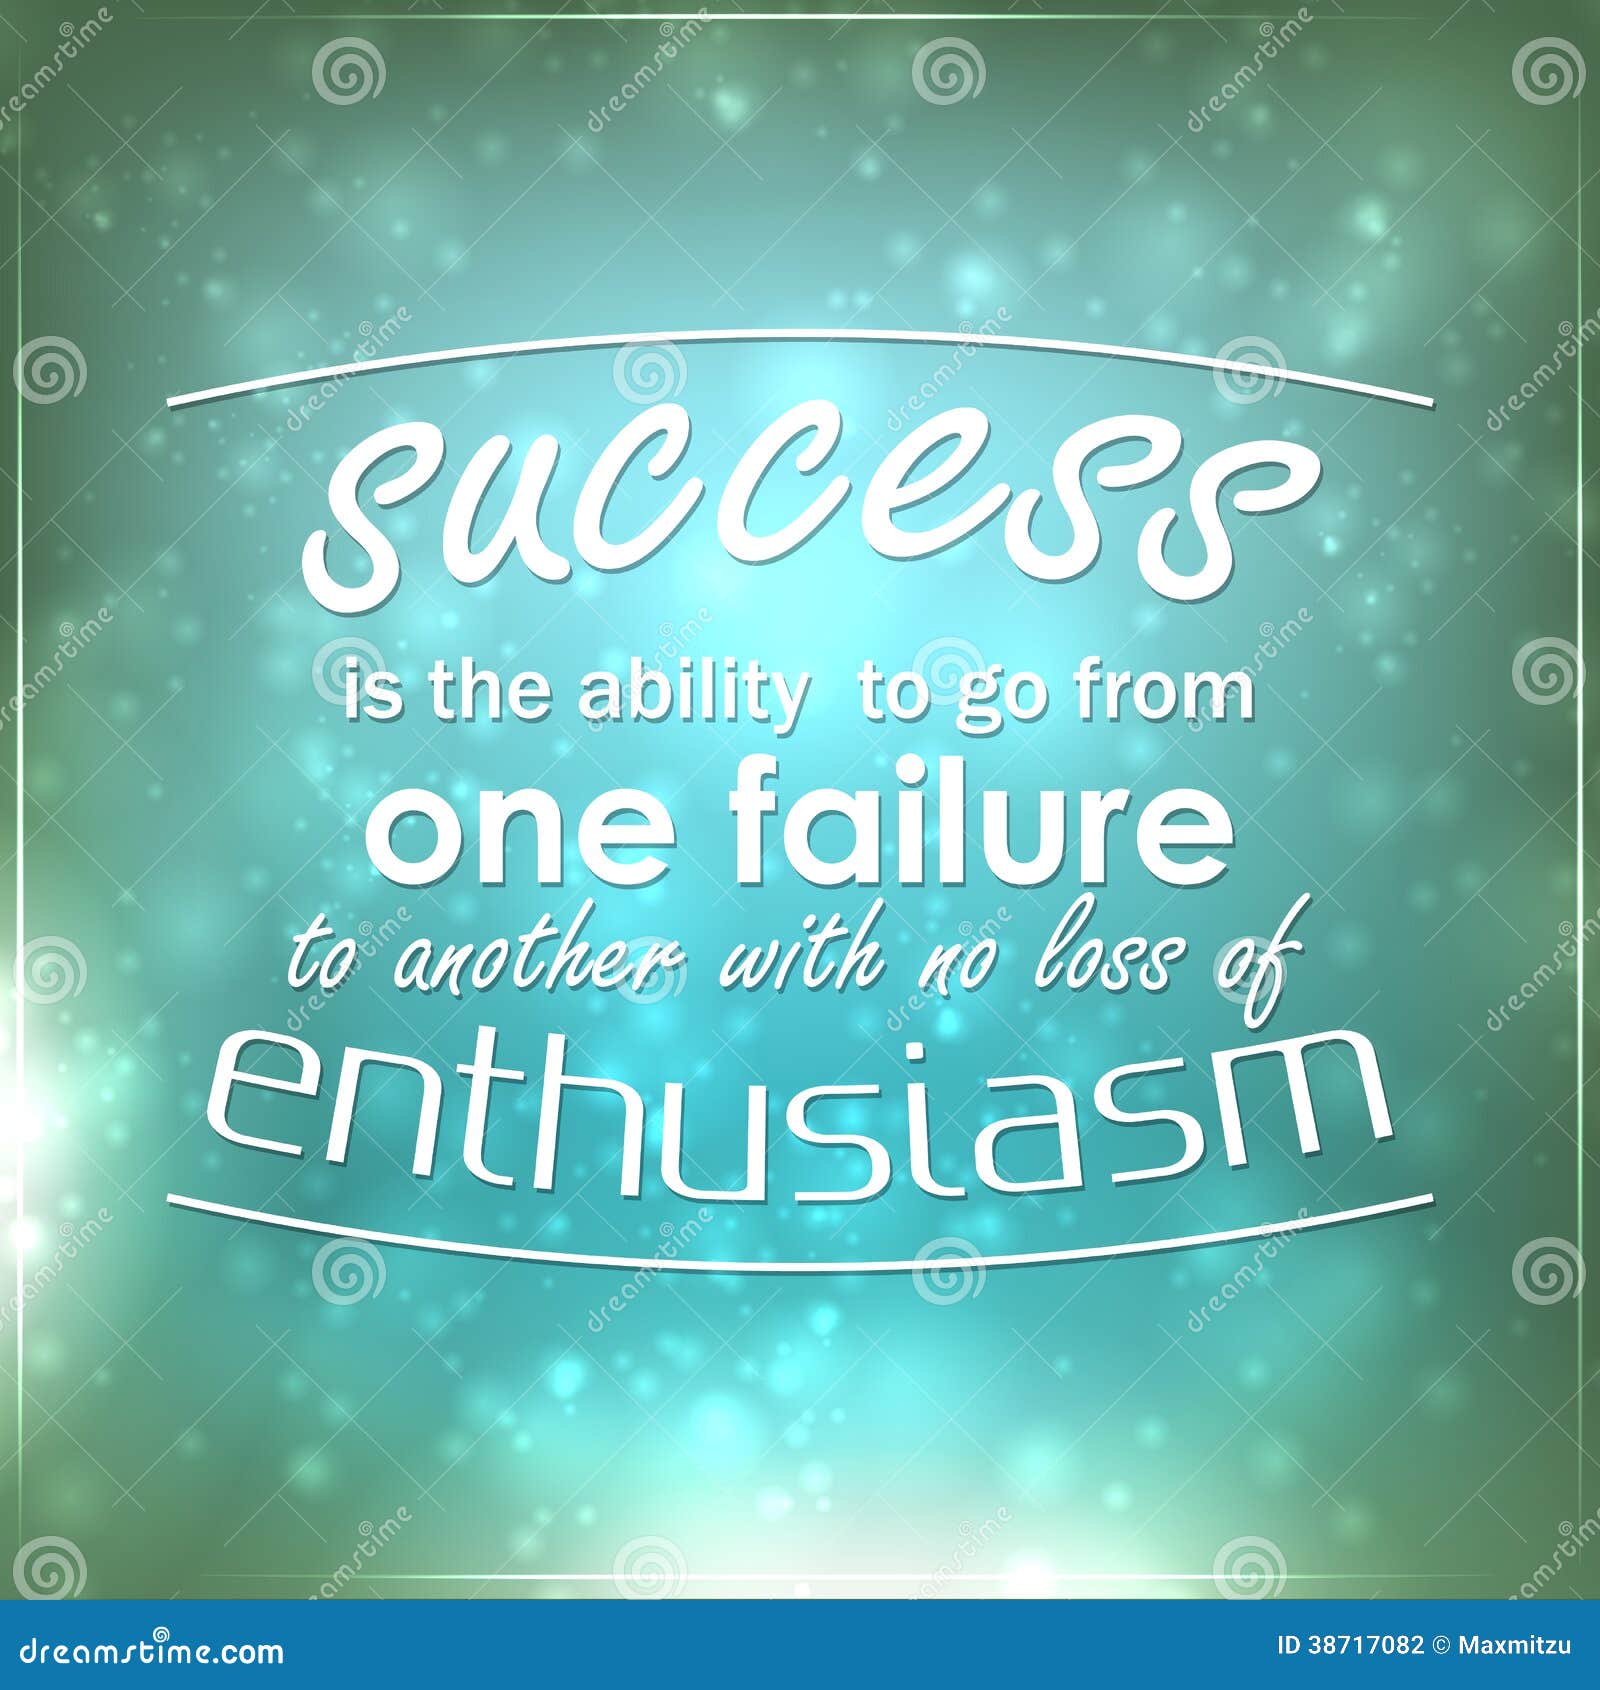 success is the ability to go from one failure to another